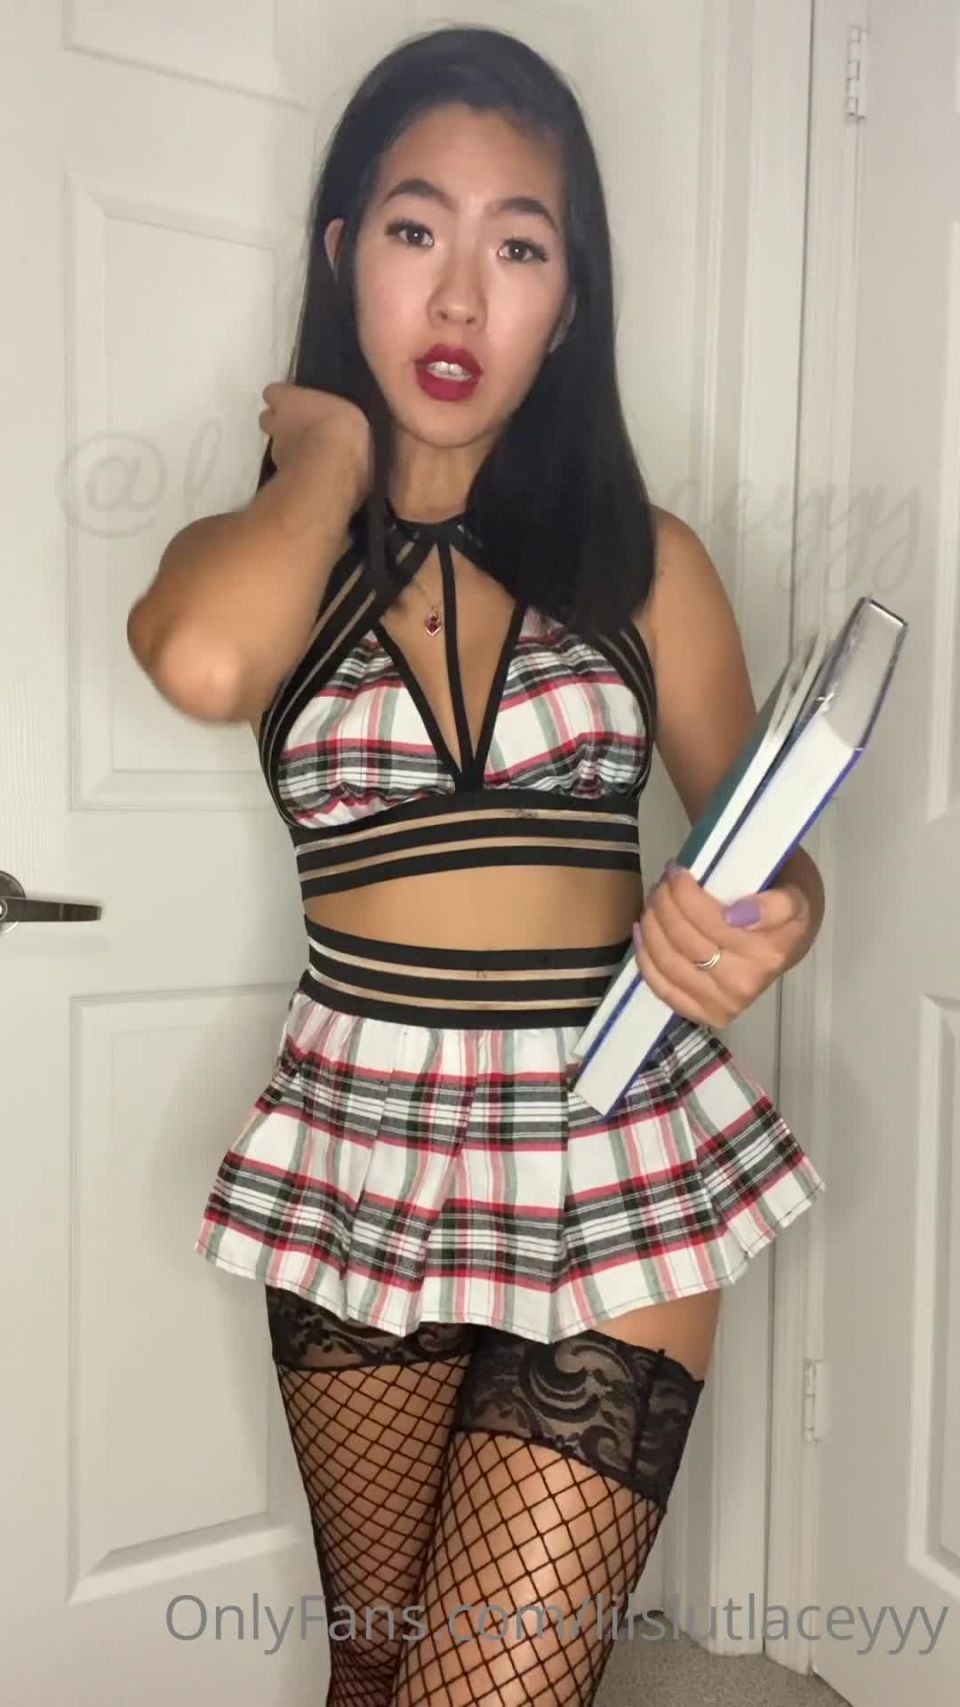 Onlyfans - Slutty Asian Princess - lilslutlaceyyy - lilslutlaceyyy school girl roleplay Used the fuck machine in my ass since I was out for a week - 24-02-2021.